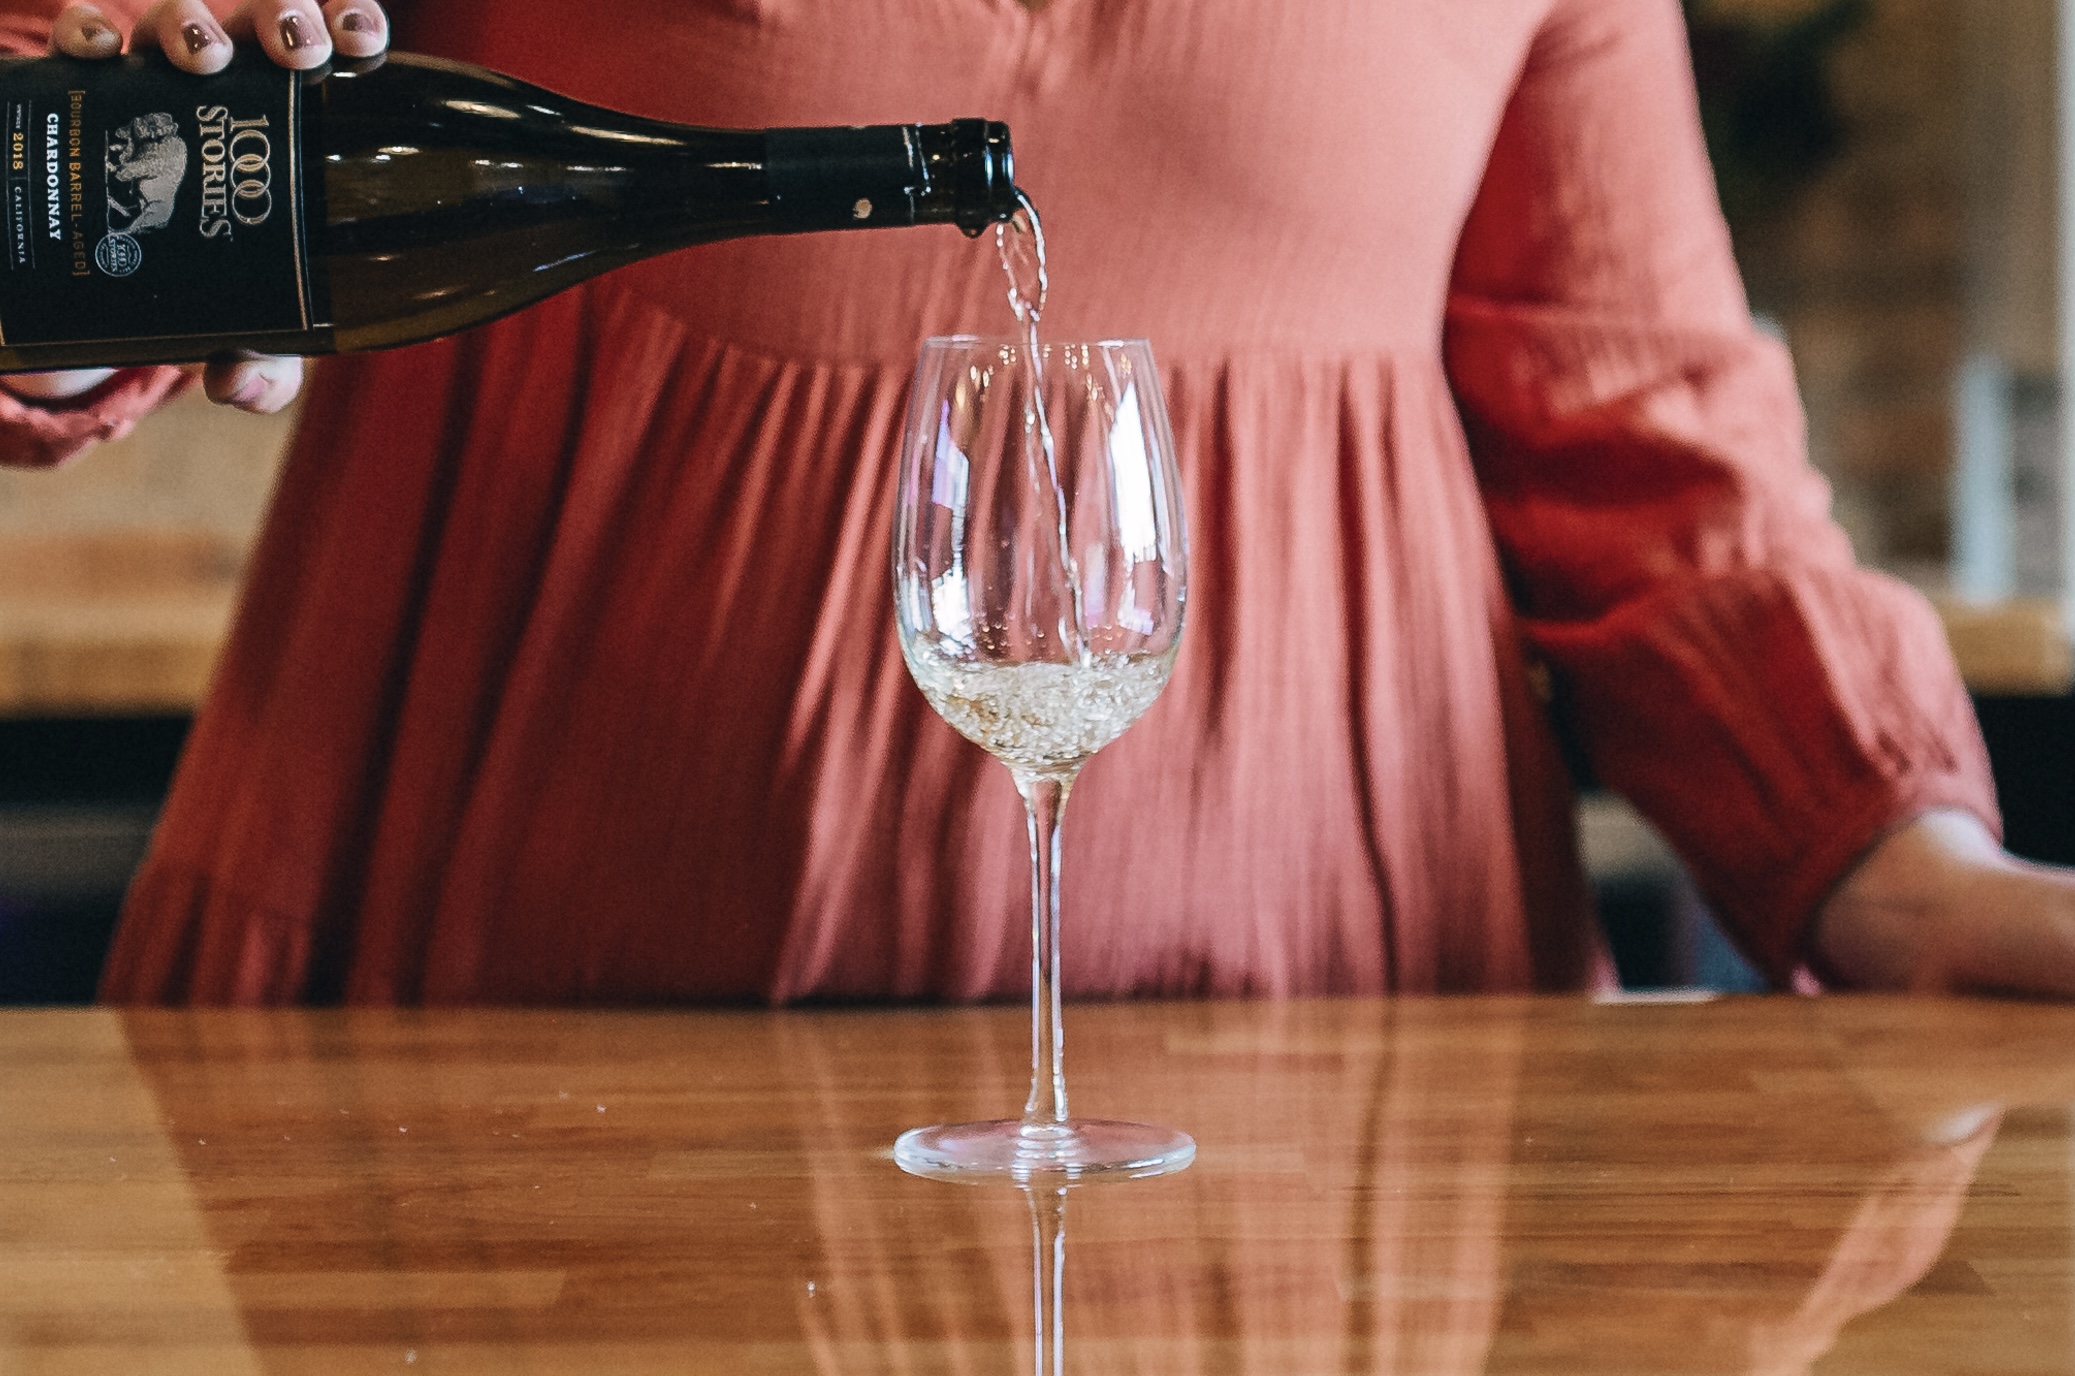 Image of wine being poured from a bottle into a glass in front of a woman.